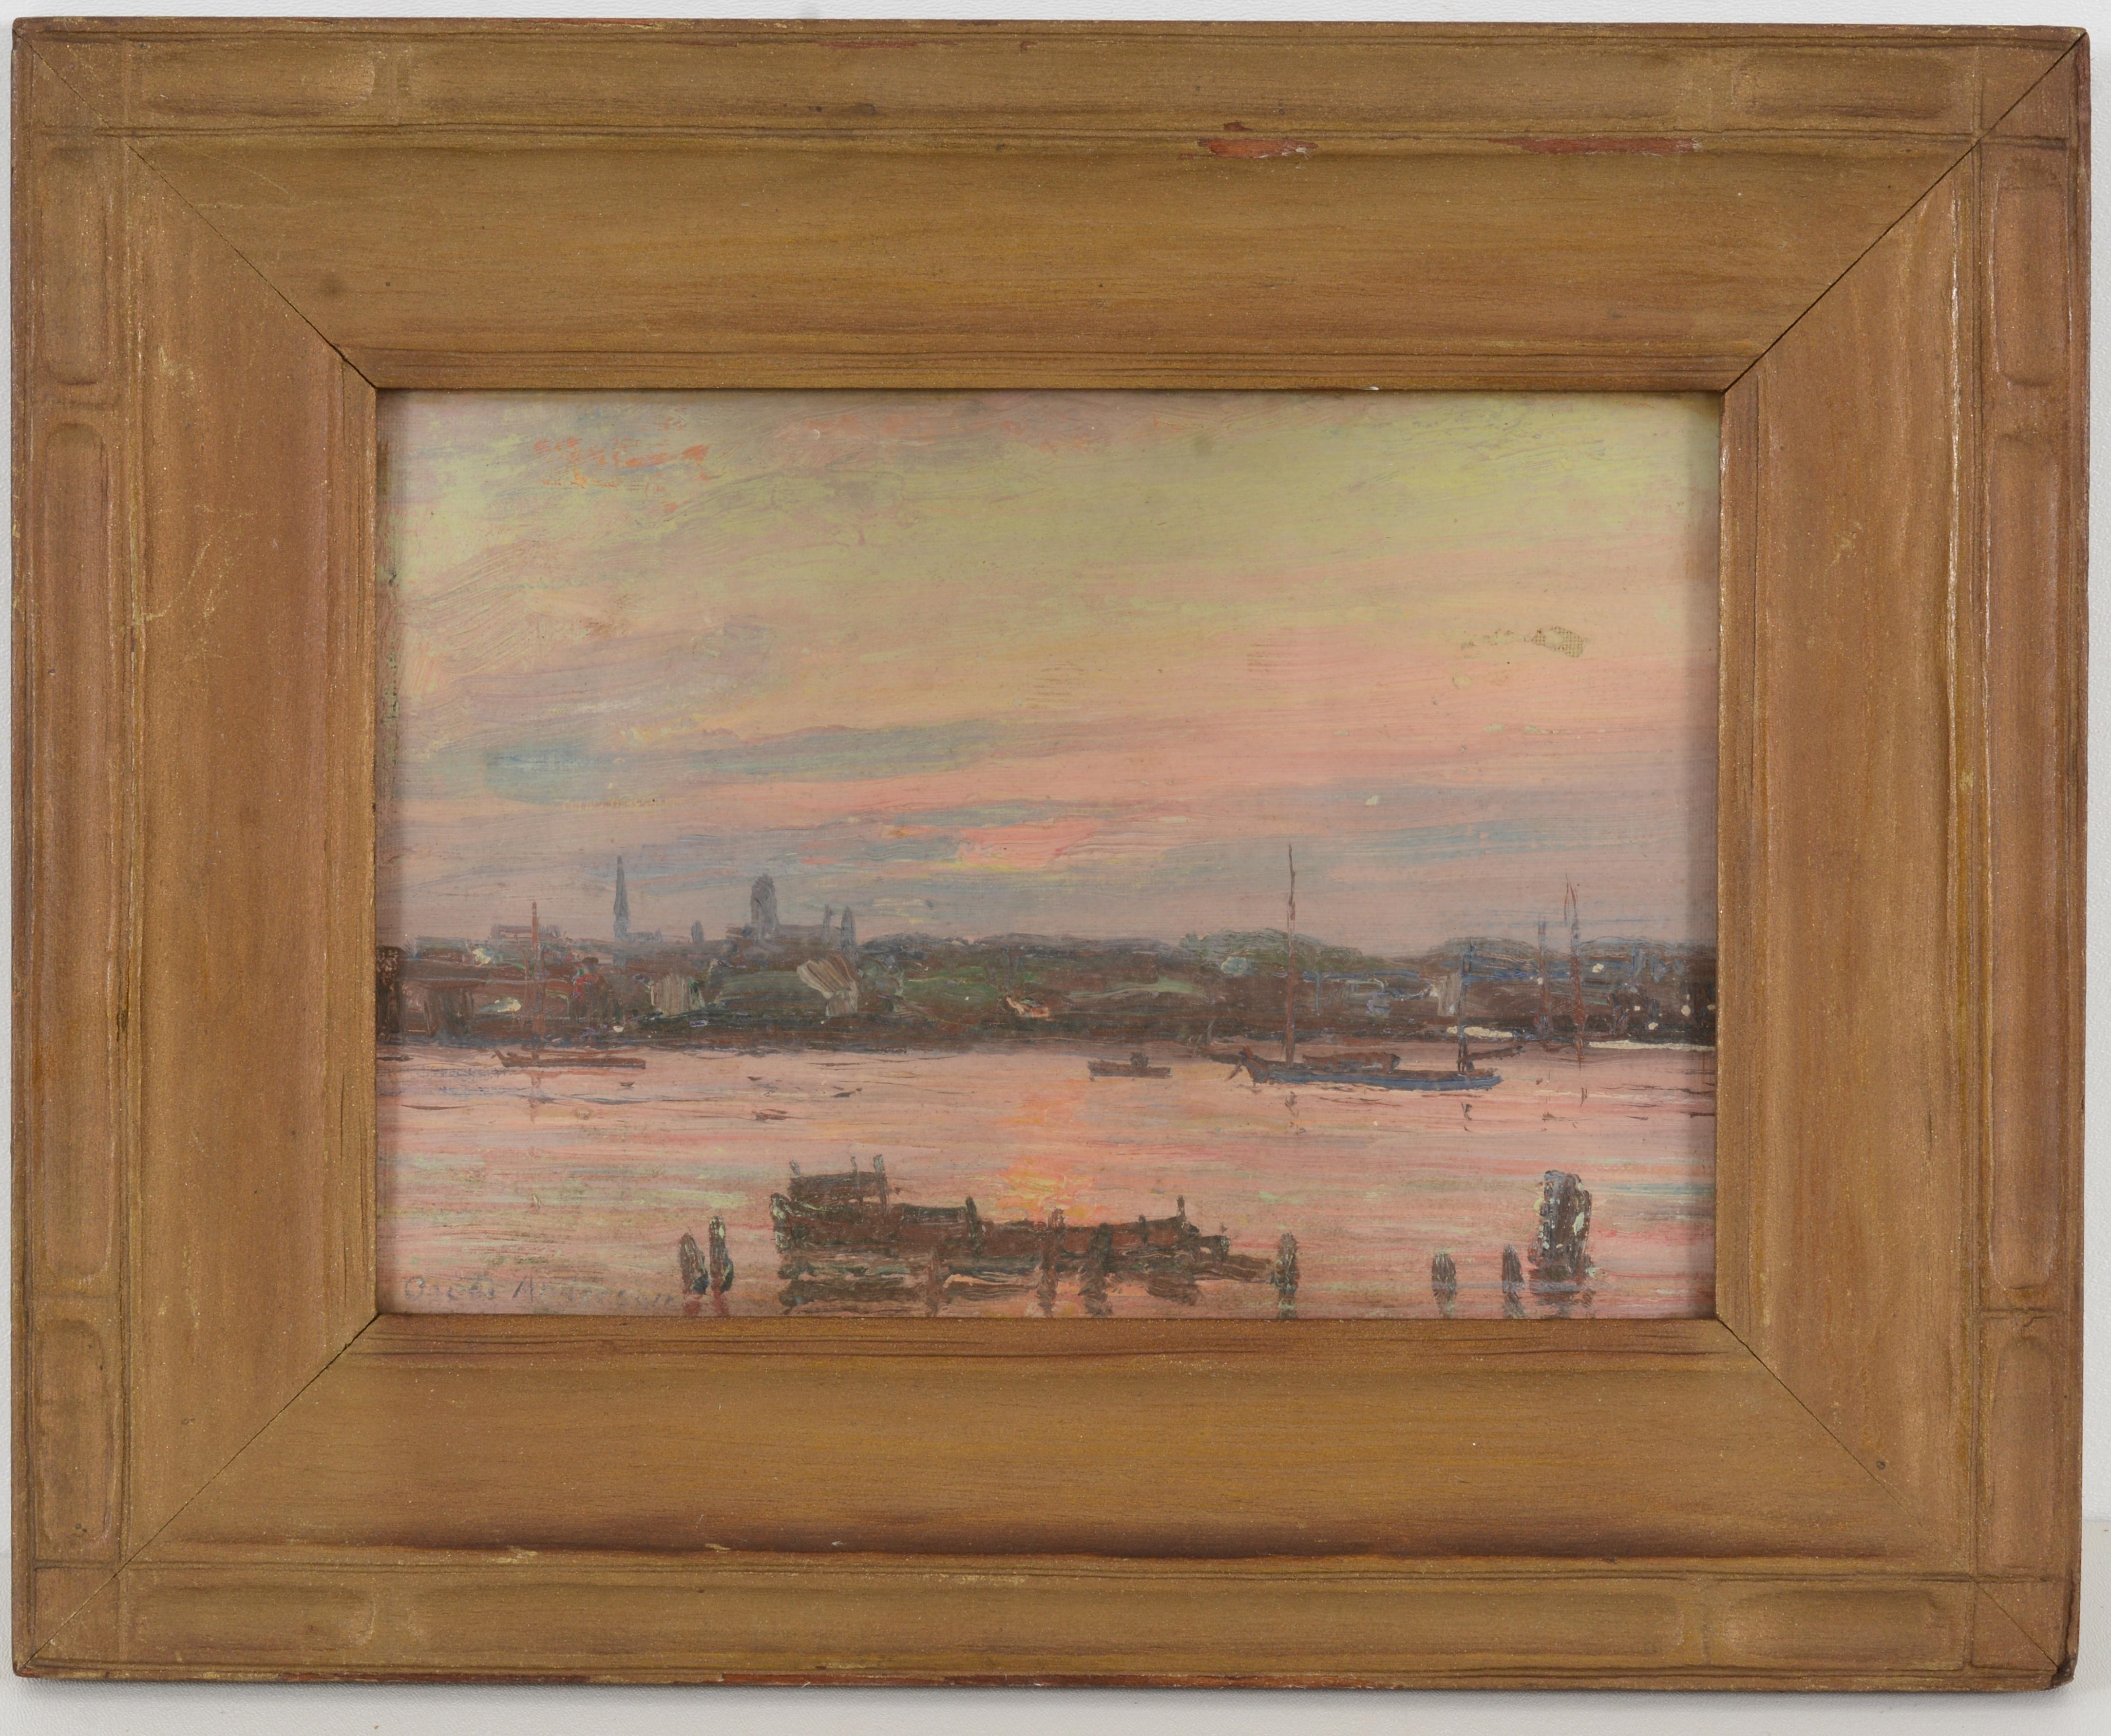 English evening landscape with boats along a canal and city skyline - Oscar Anderson